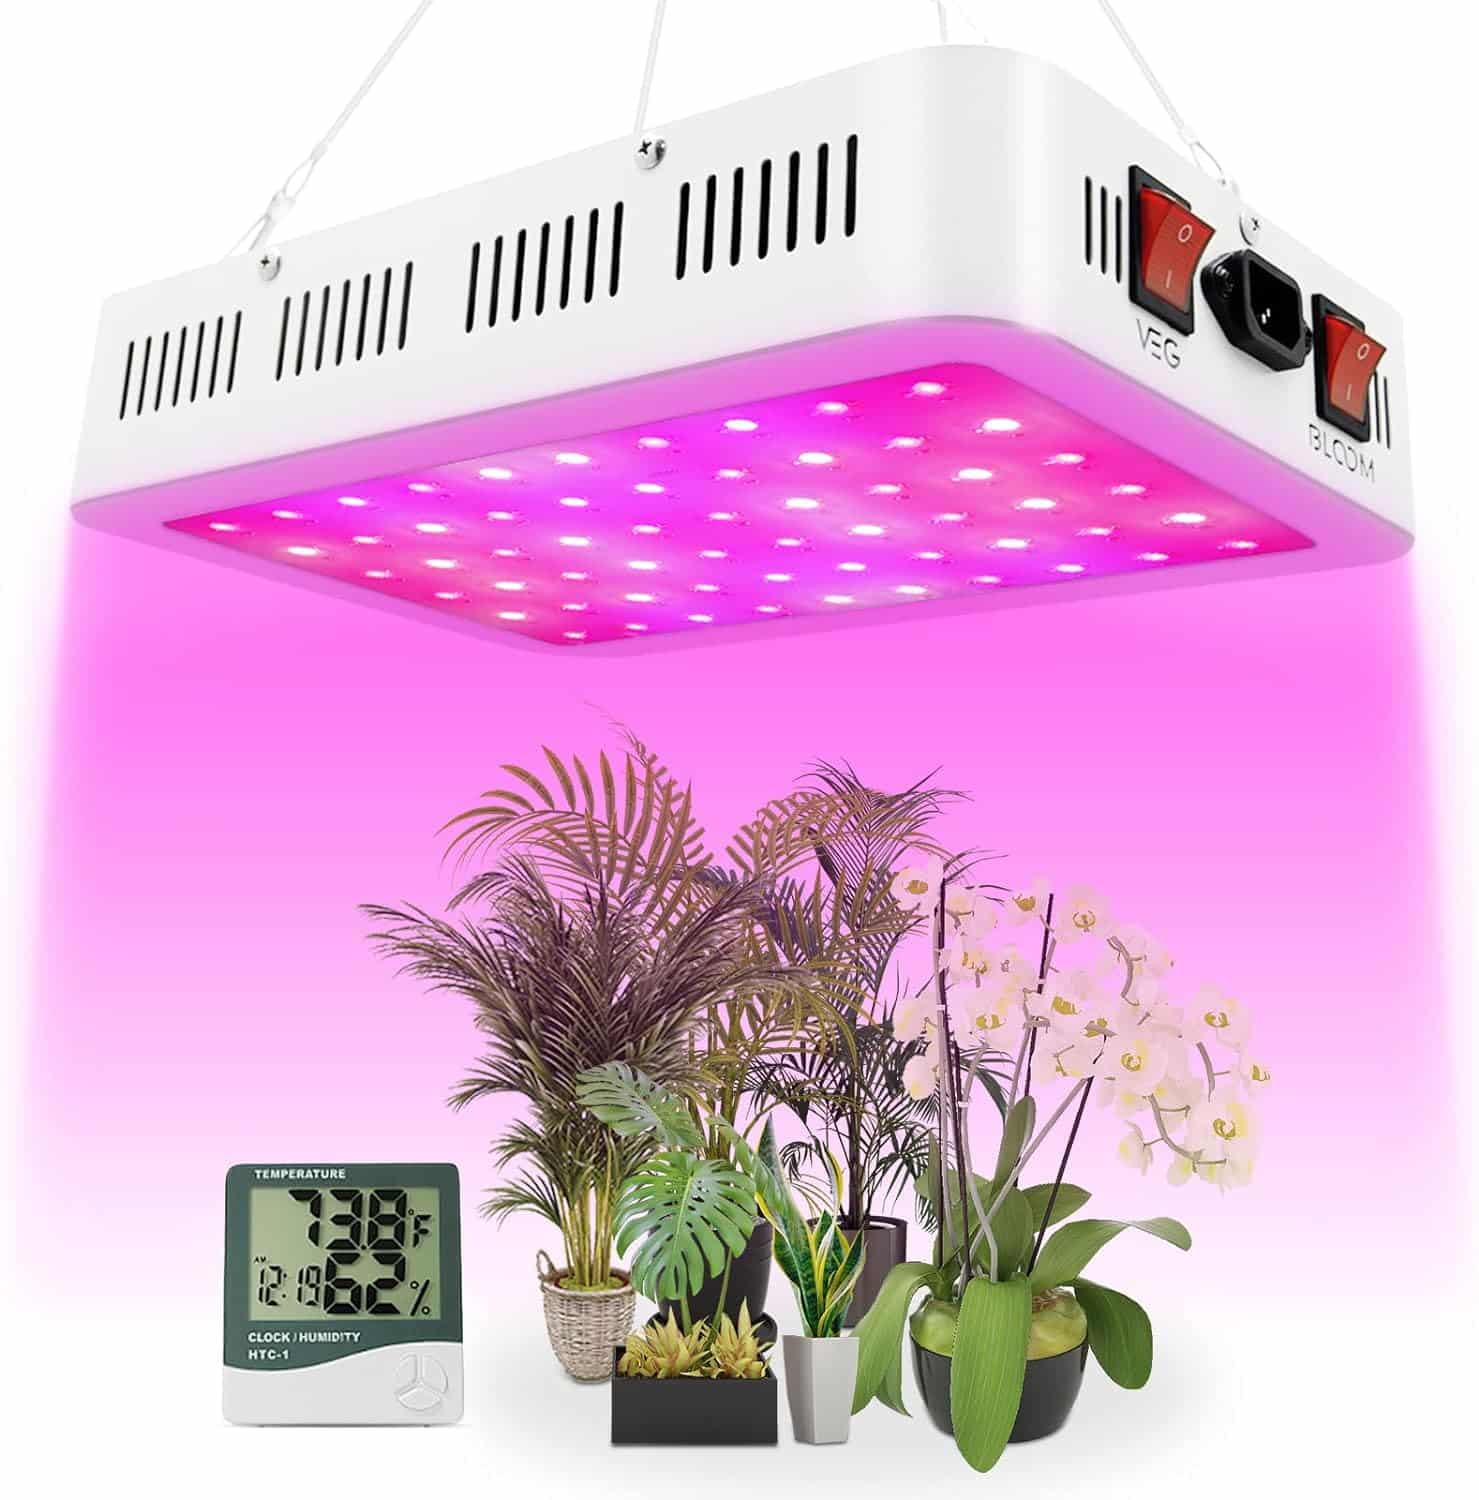 NAILGIRLS LED Grow Light, 600W Grow Lamp for Indoor Plants Full Spectrum Plant Growing Light Fixtures with Daisy Chain Temperature Hygrometer